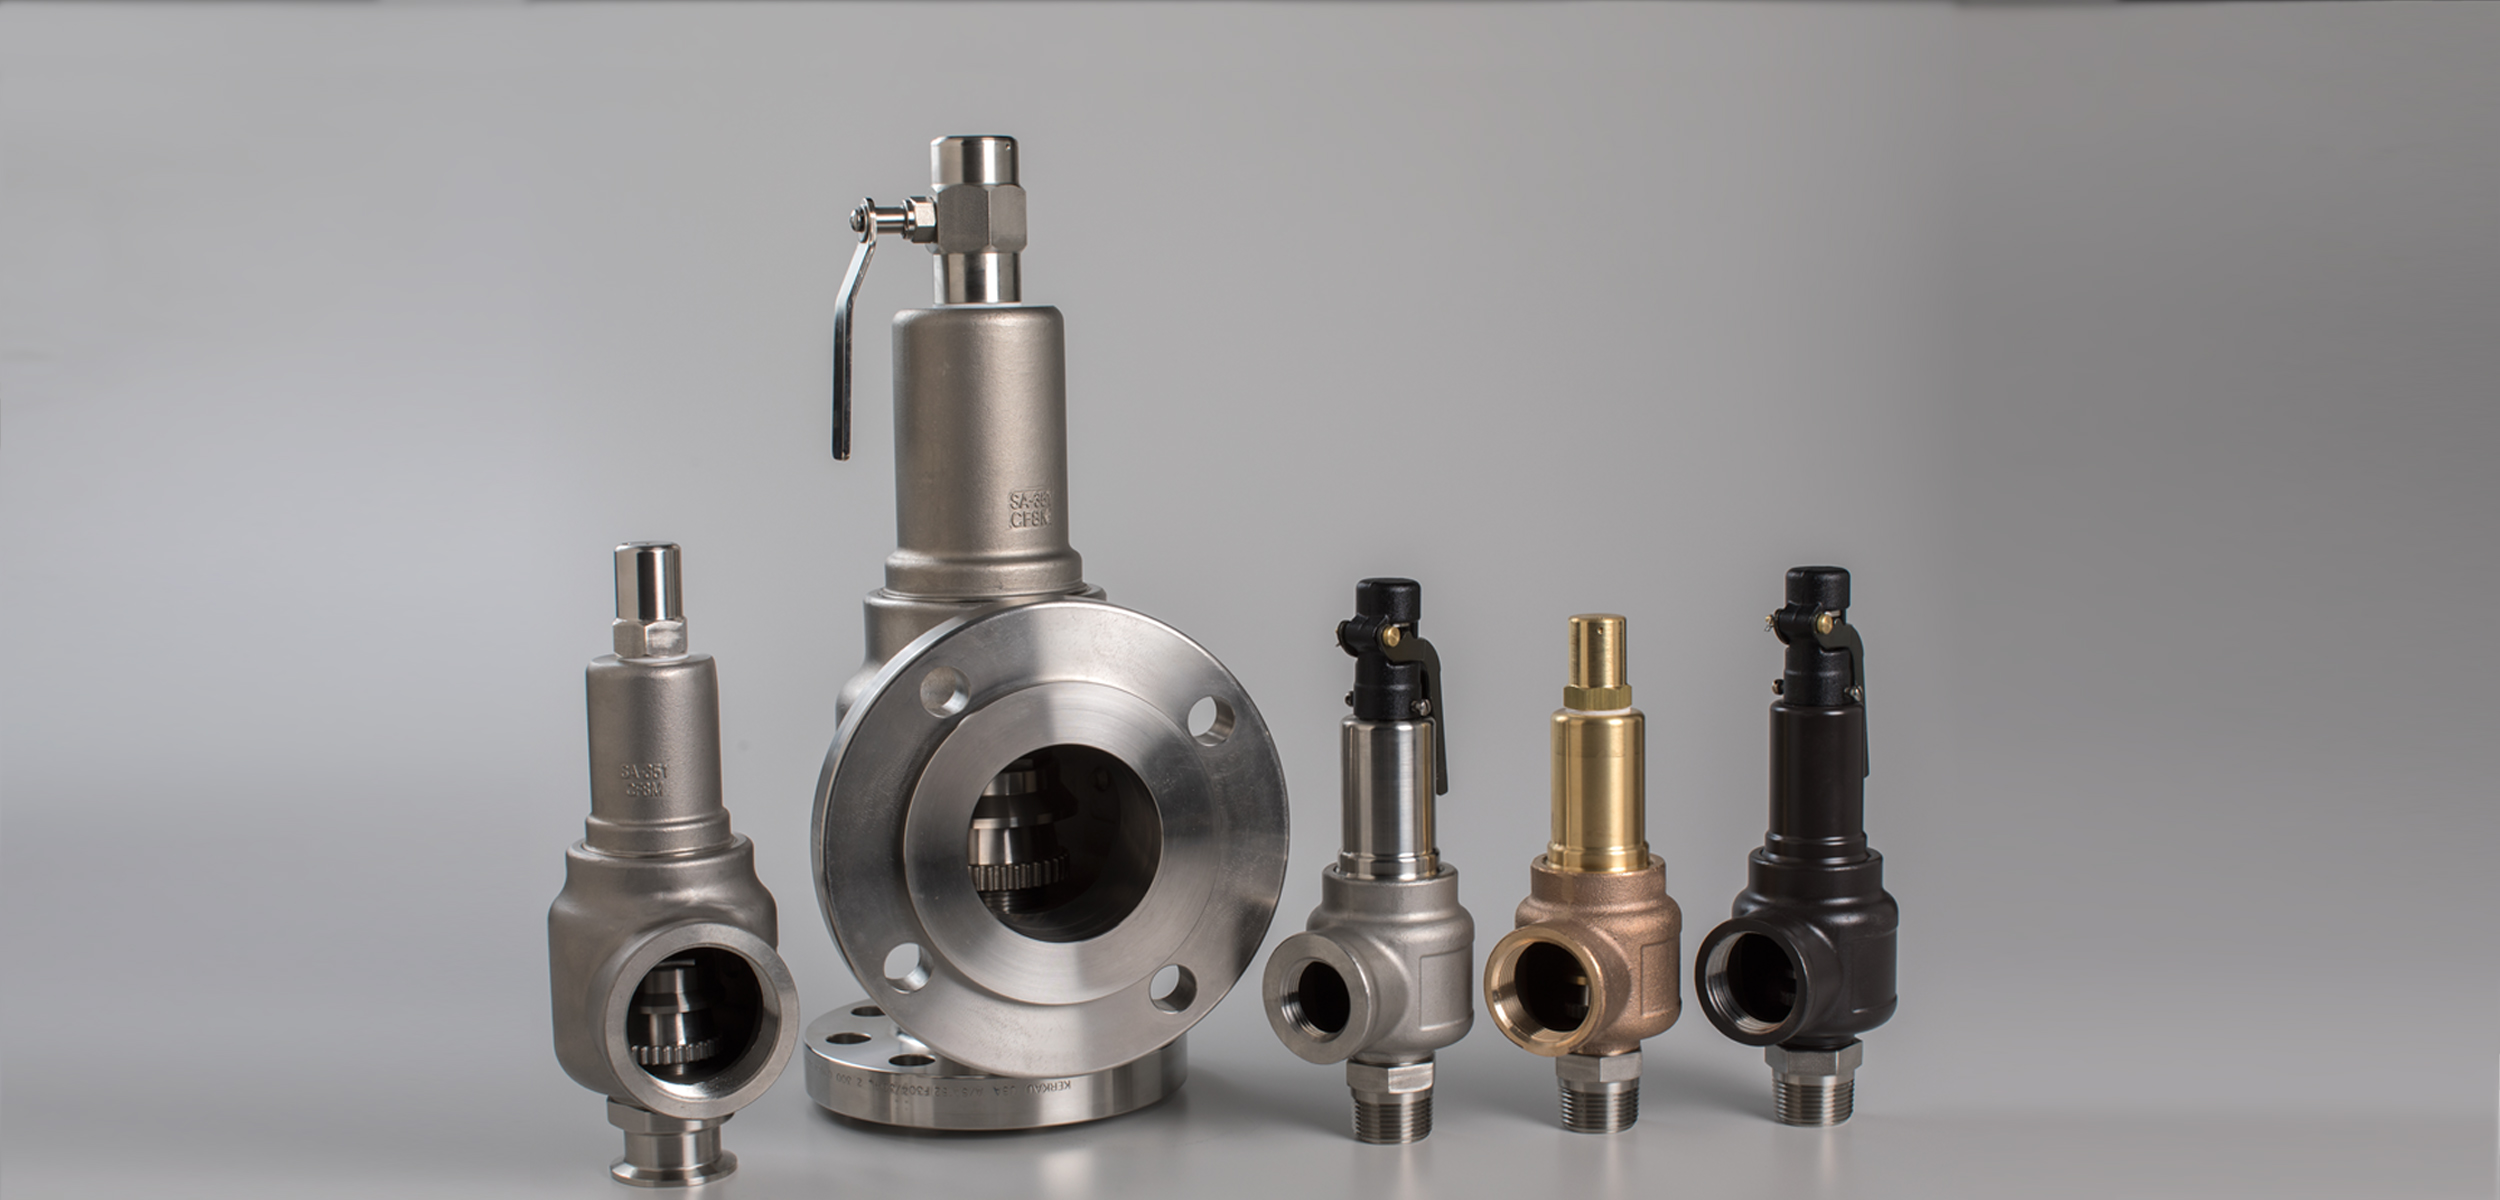 Kingston Valves KNG pressure and safety relief valves